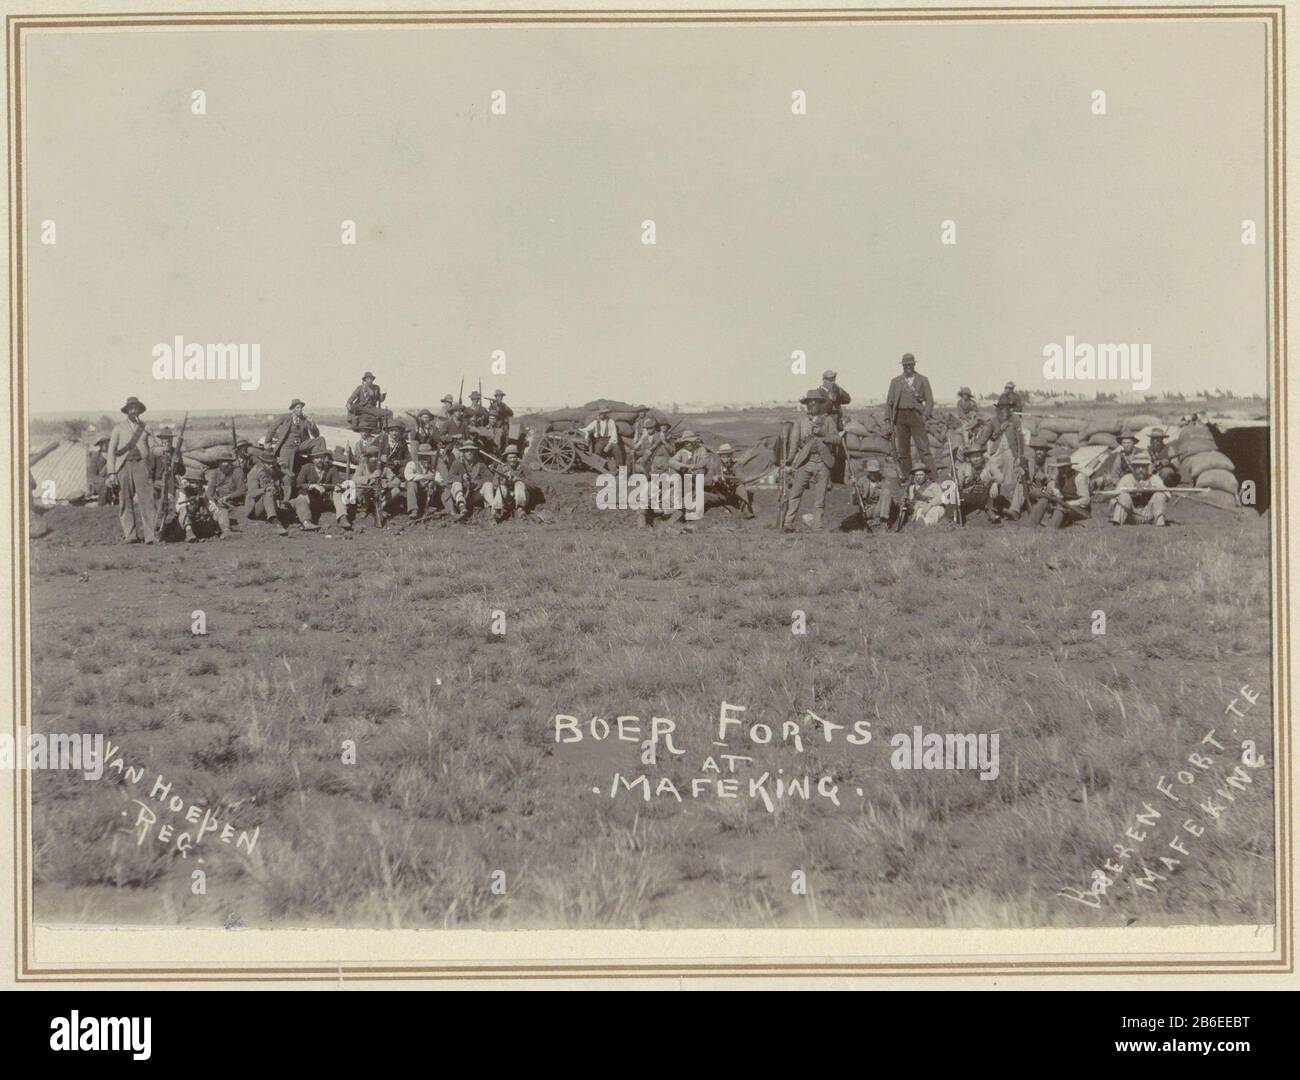 Farmers in their positions to Mafeking Boer forts at Mafeking Boer Fort to Mafeking (title object) Part of album with recordings of the Second Boer War (1899-1902) . Manufacturer : photographer Jan van Hoepen (listed property) Place Manufacture: Mafeking Dating: 1899 - 1900 Physical features: daylight gelatin silver print material: paper paper cardboard Technique: daylight gelatin silver print dimensions: mat: h 151 mm × W 204 mm Subject: defensive measures (military) (+ land forces) Second Boer War (1899-1902) Where: Mafeking Stock Photo